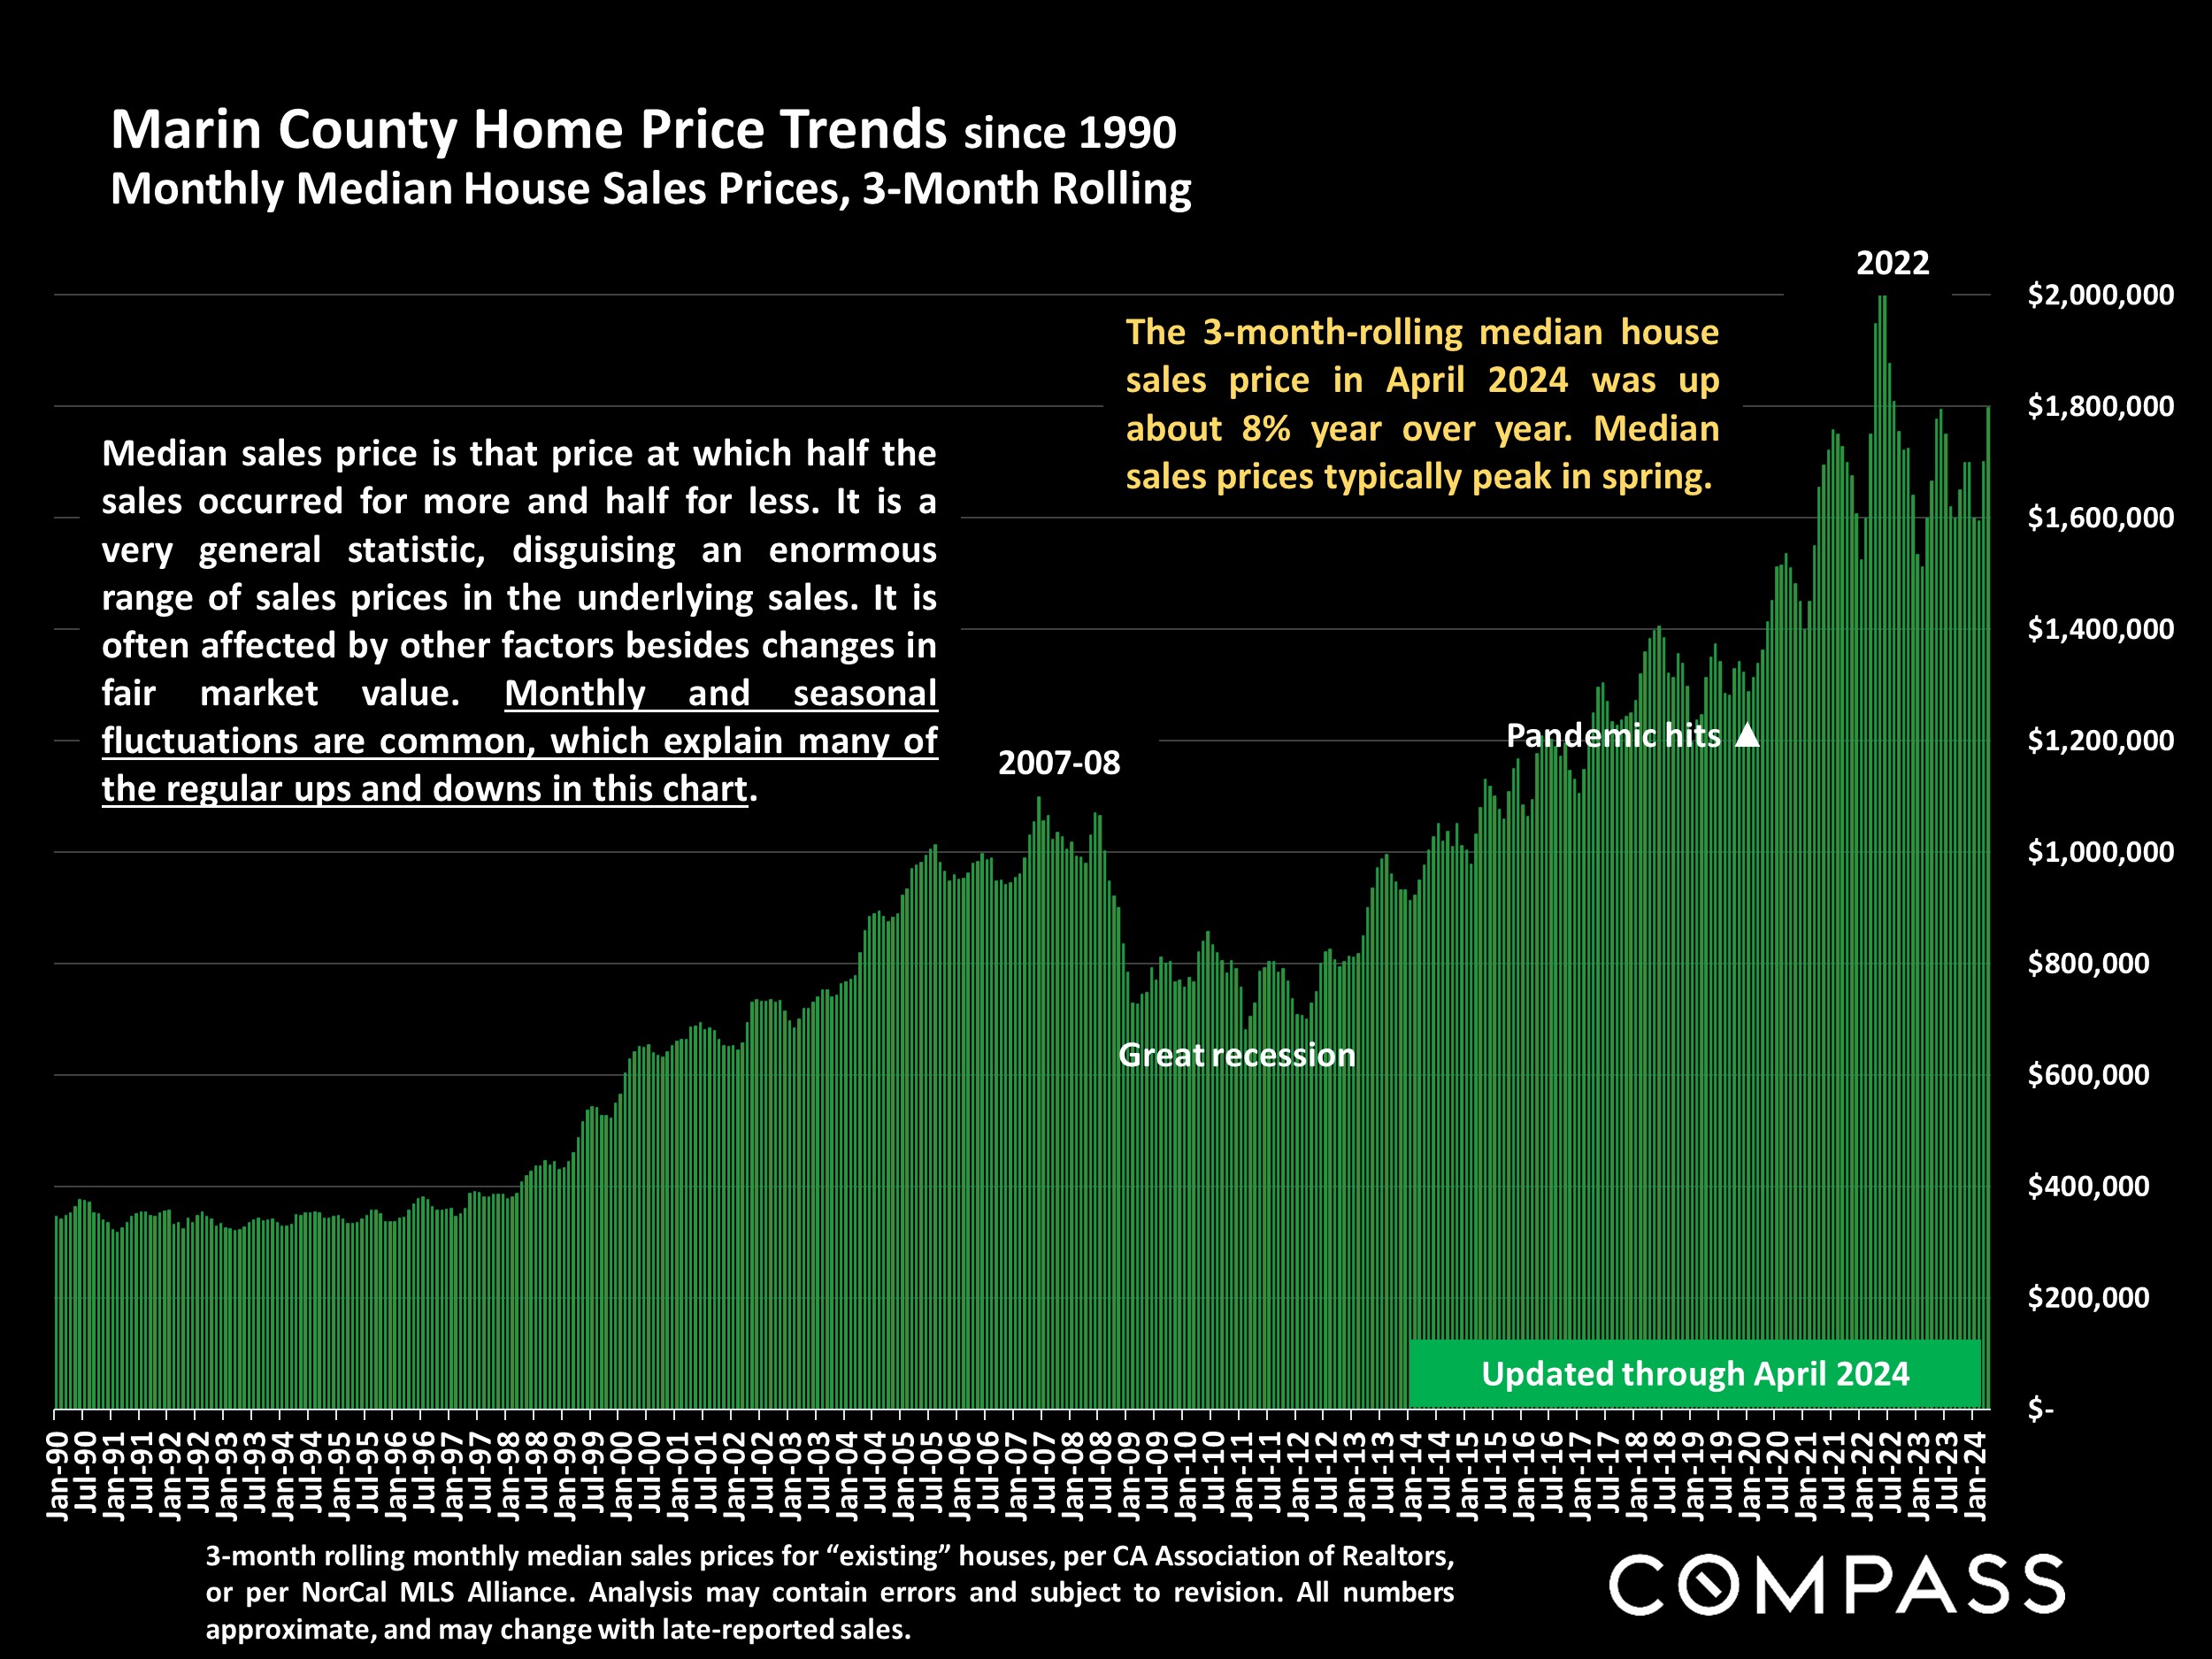 Marin County Home Price Trends since 1990 Monthly Median House Sales Prices, 3-Month Rolling